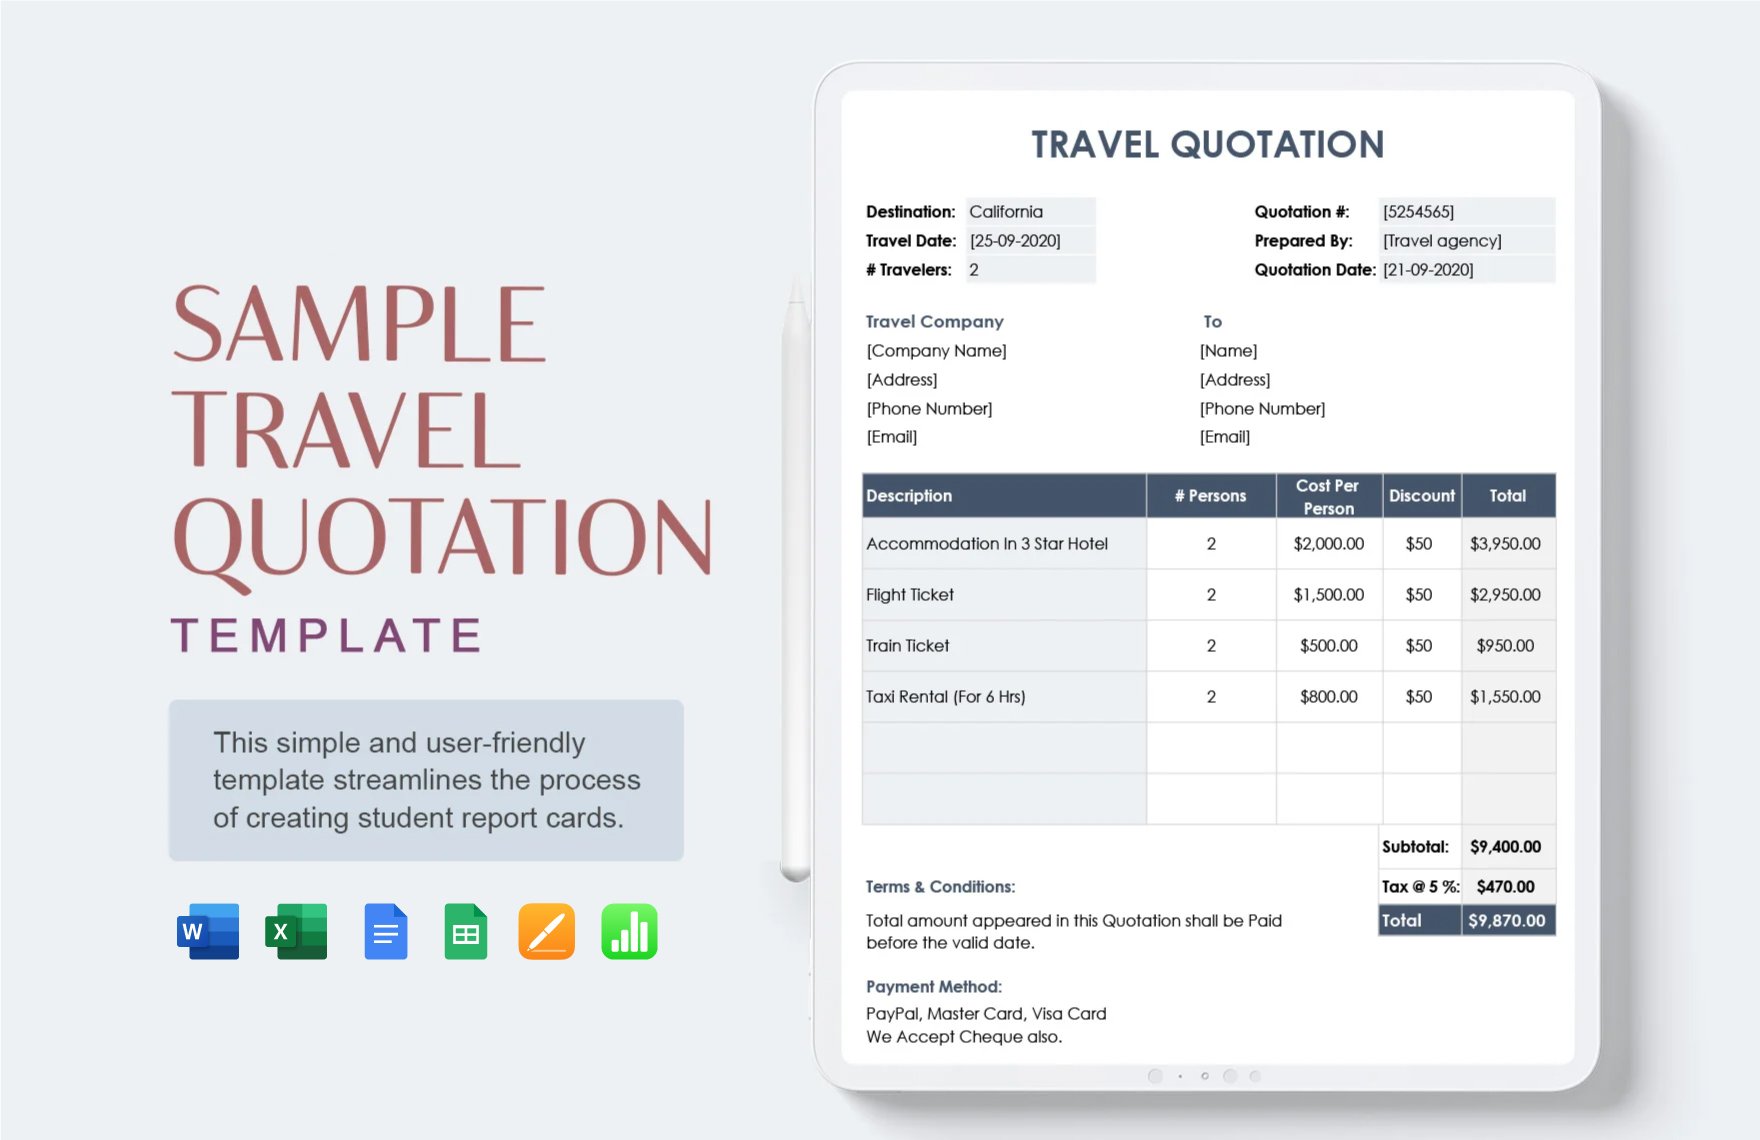 Free Sample Travel Quotation Template